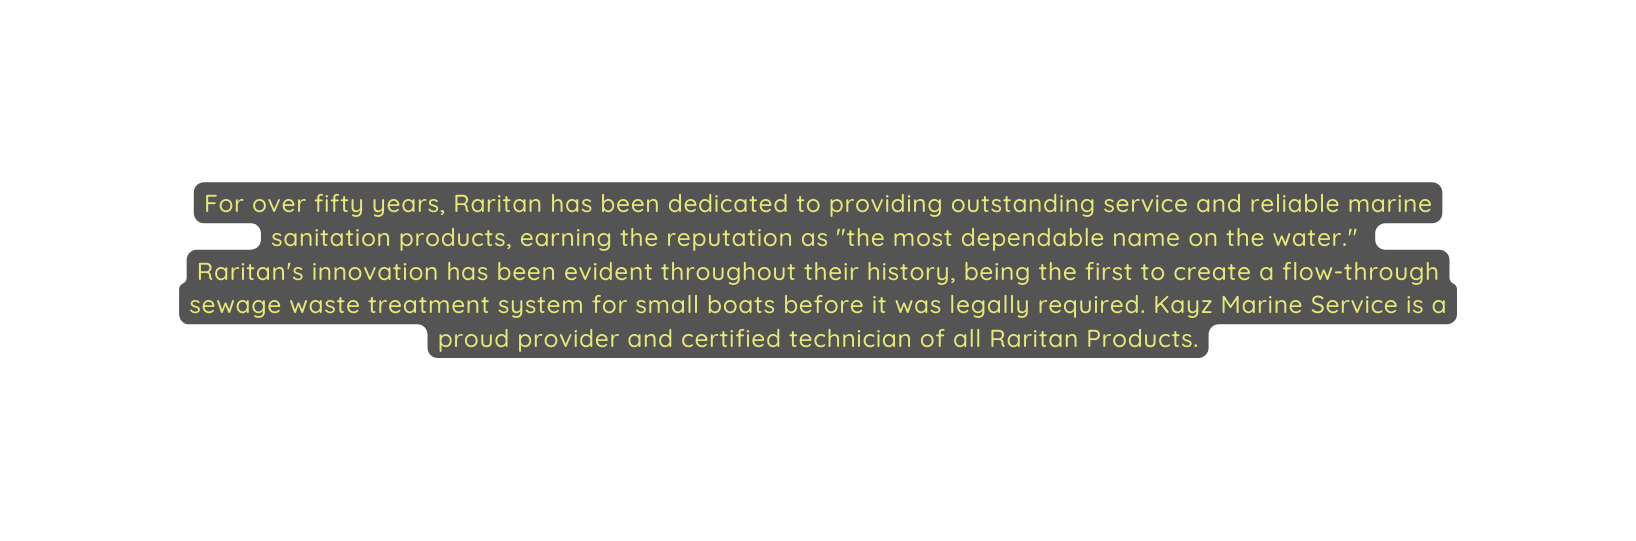 For over fifty years Raritan has been dedicated to providing outstanding service and reliable marine sanitation products earning the reputation as the most dependable name on the water Raritan s innovation has been evident throughout their history being the first to create a flow through sewage waste treatment system for small boats before it was legally required Kayz Marine Service is a proud provider and certified technician of all Raritan Products